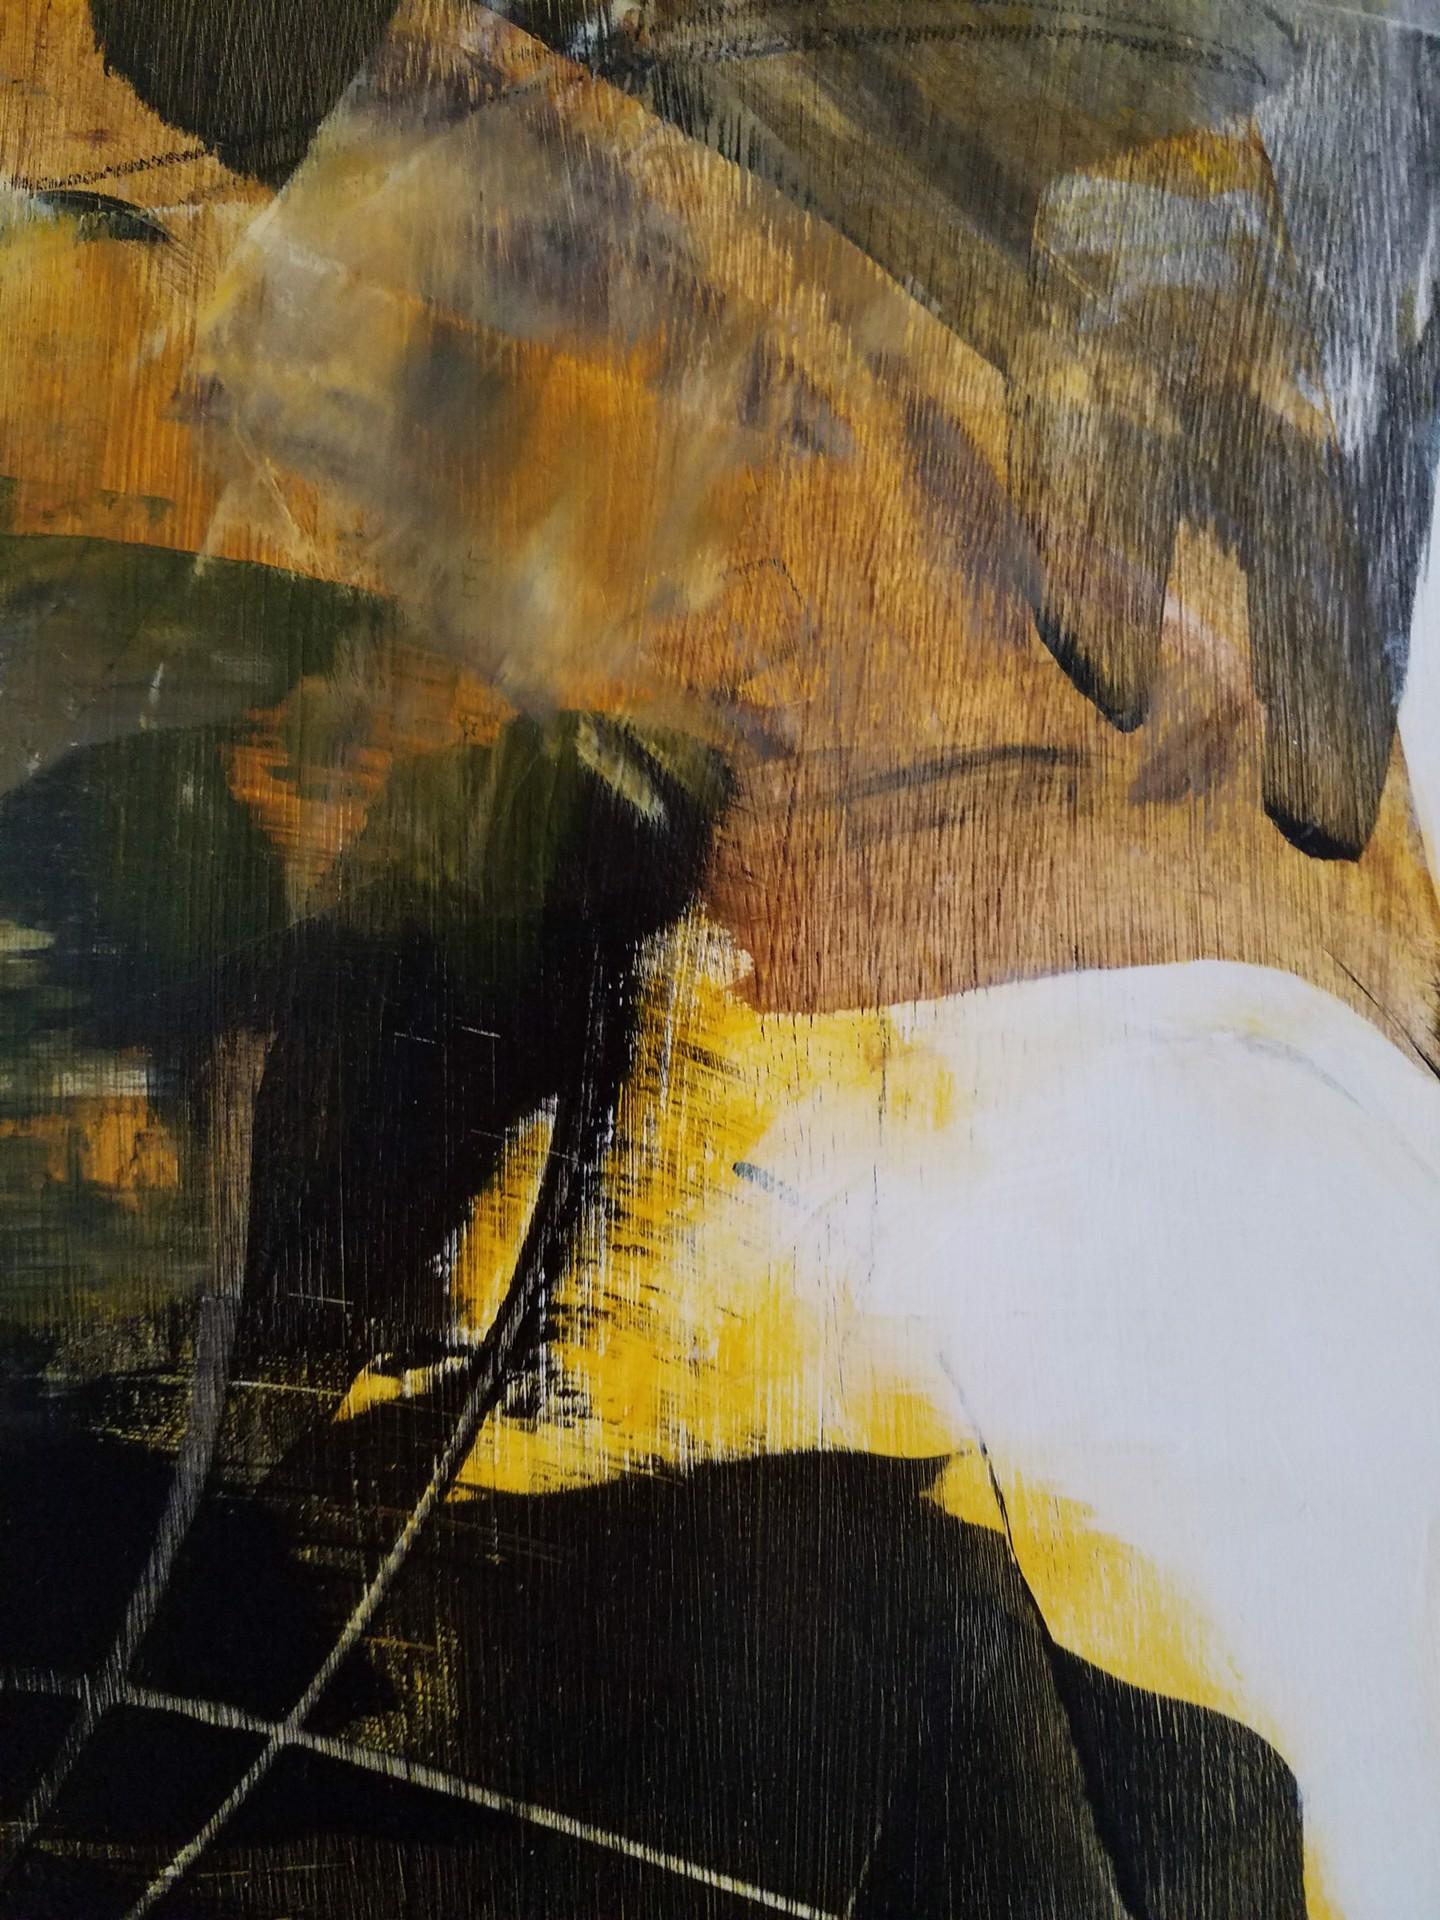 In this work by Laurie Barmore, the artist's hand is exceedingly present. Using strong strokes of black creates its own essences of form atop washes of whites, yellows, and rust. Spilling between and binding foreground and background, the artist